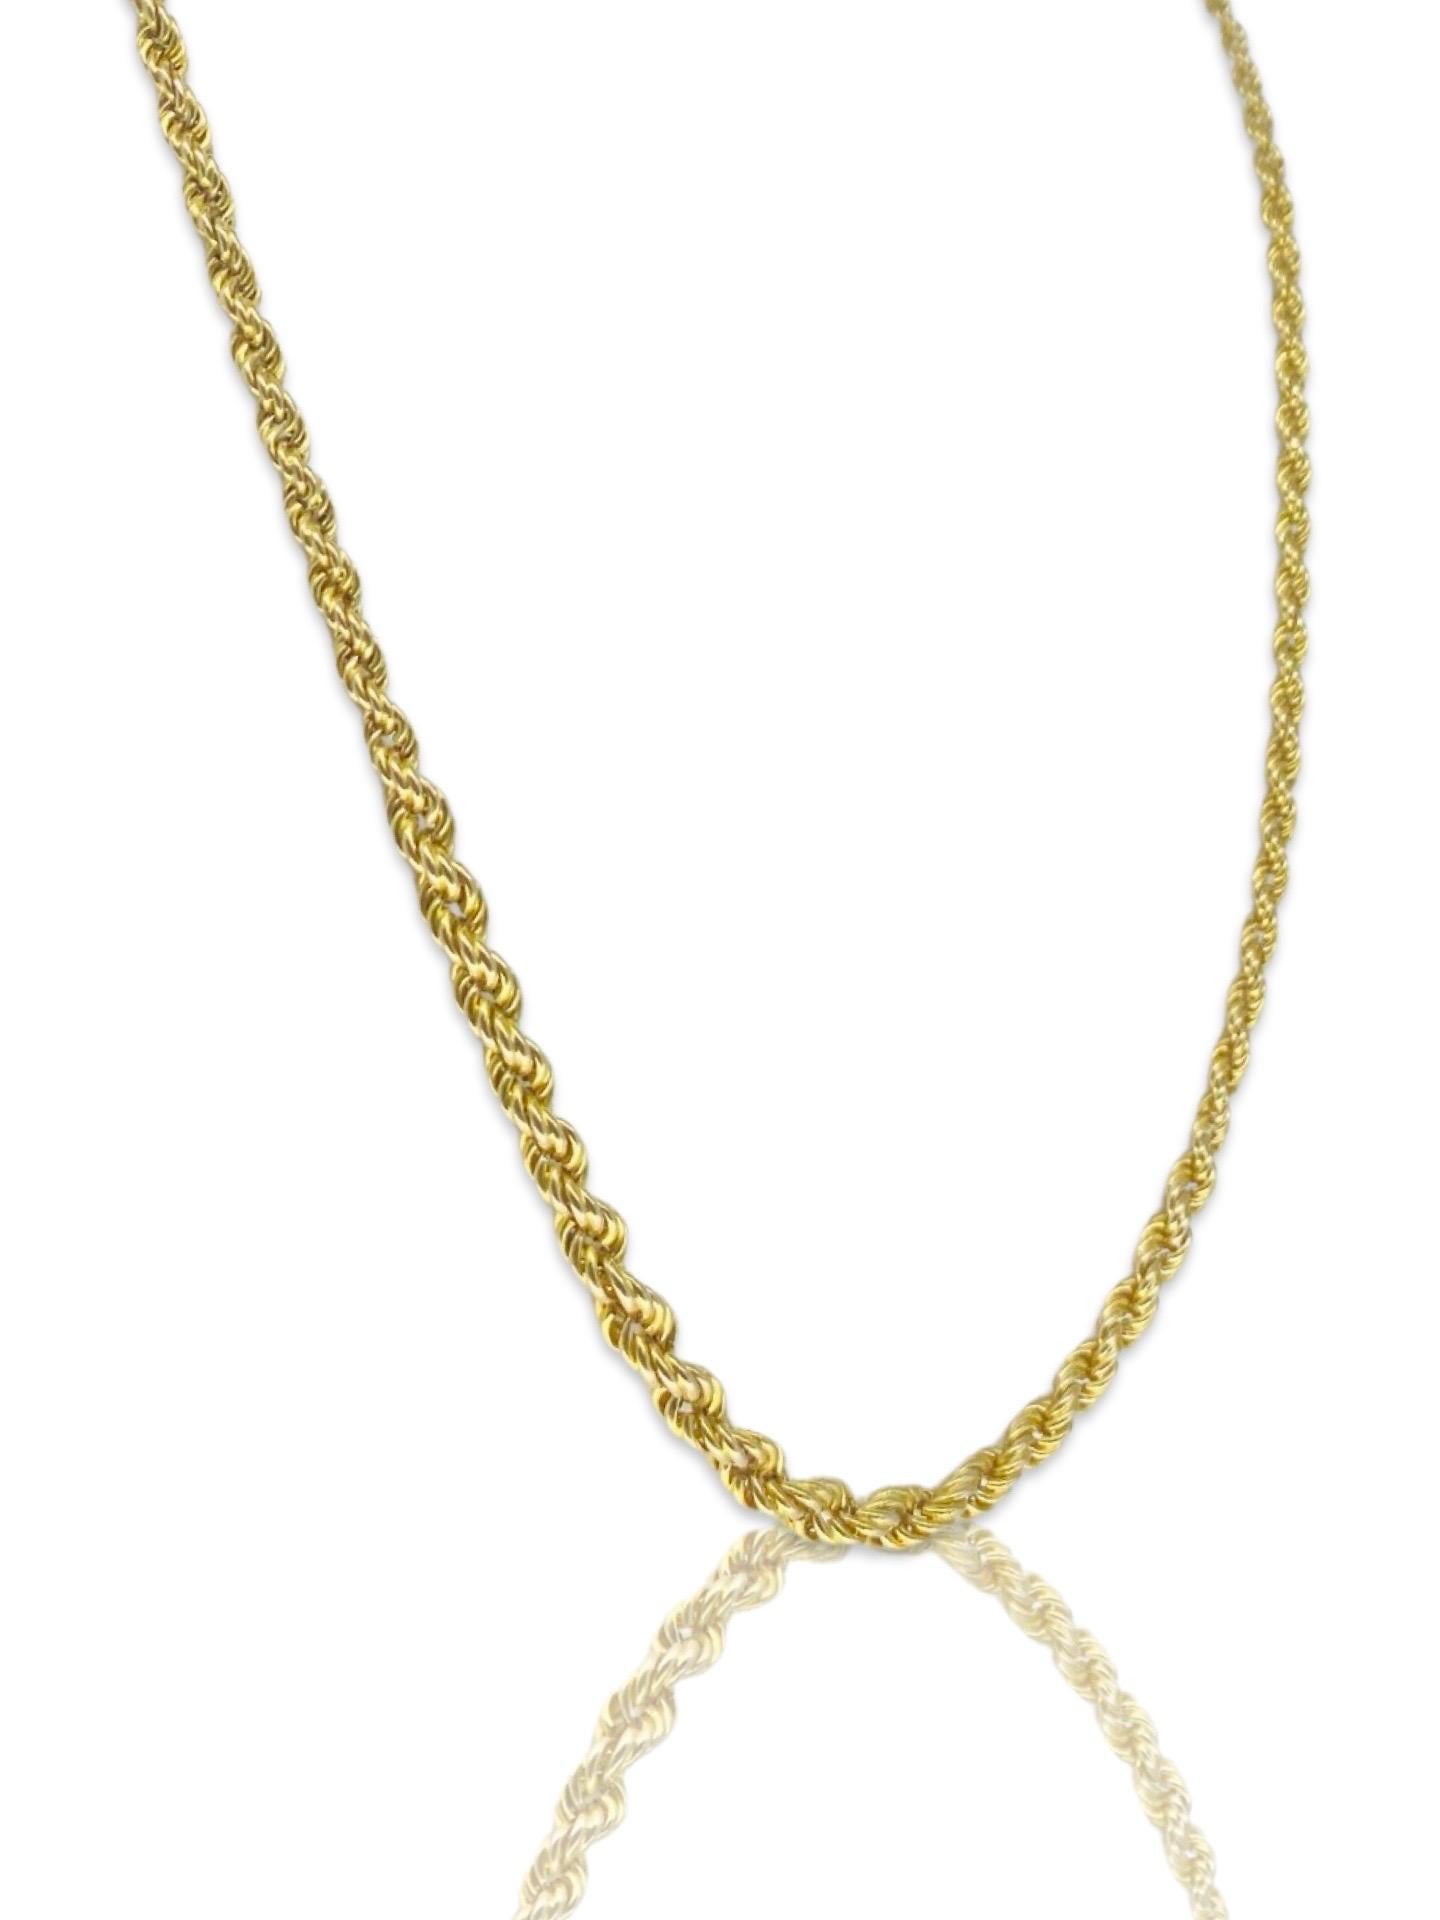 Vintage 5mm Graduating Rope Twist Necklace 18k Gold In Excellent Condition For Sale In Miami, FL